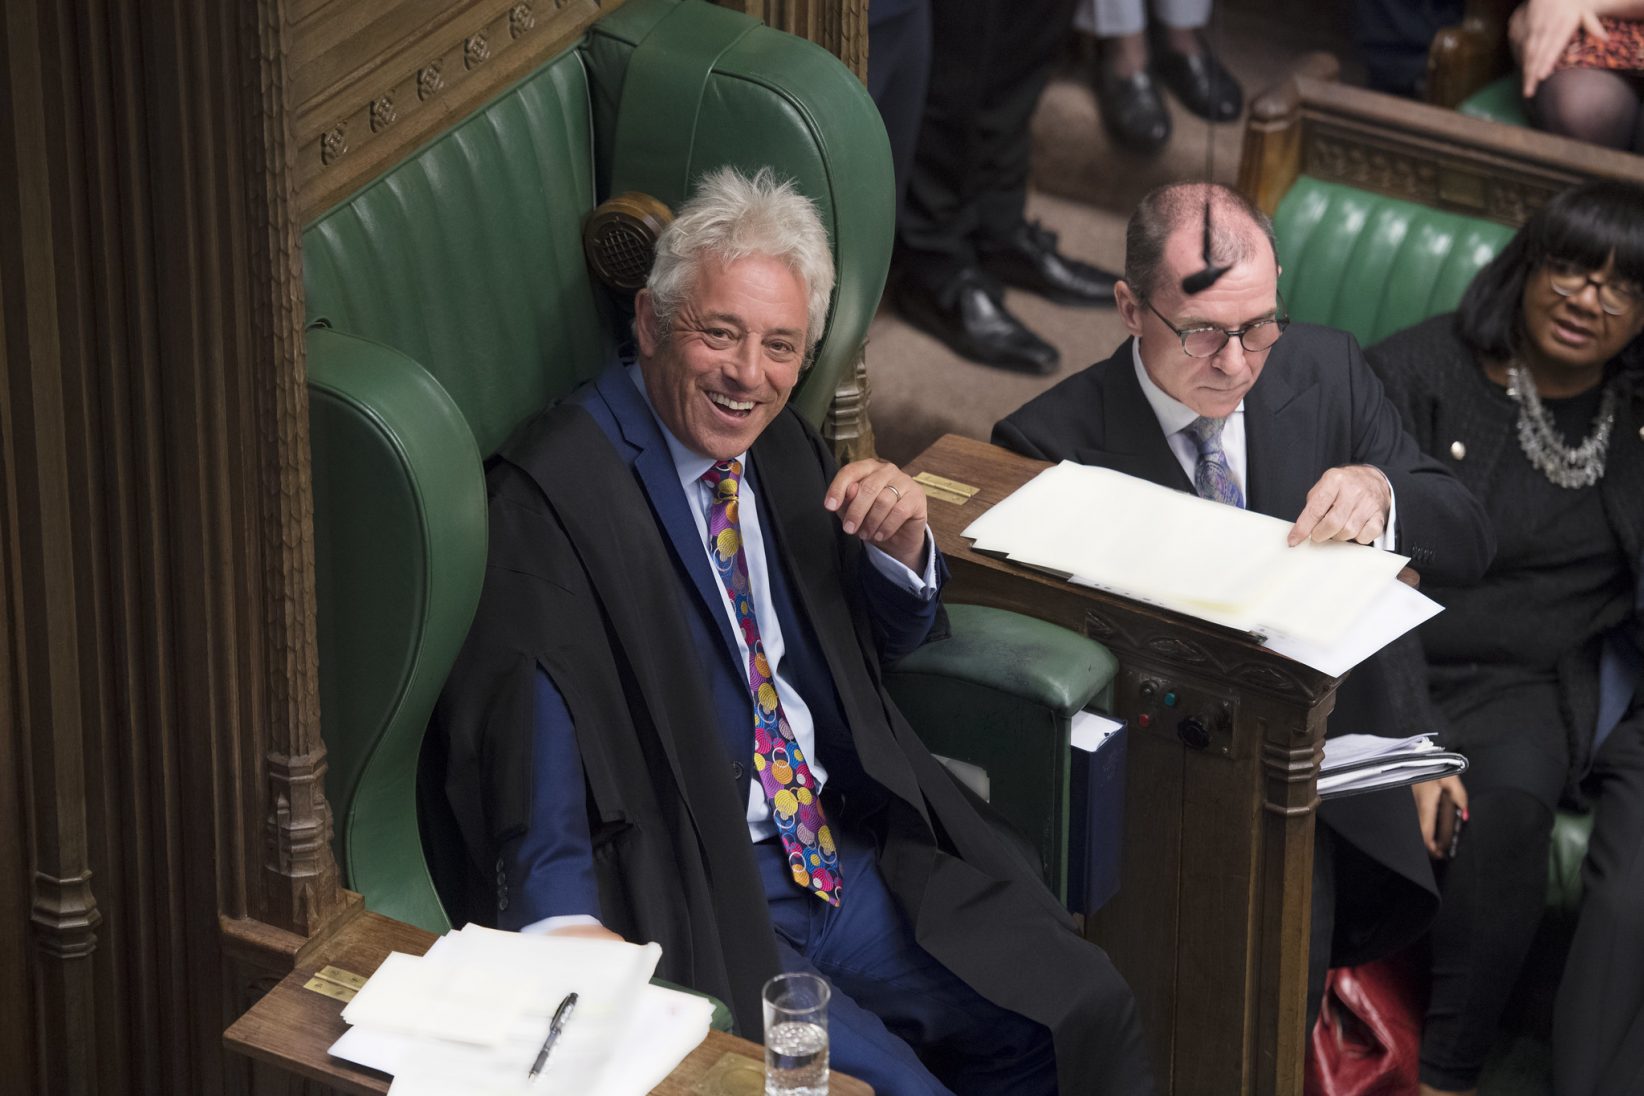 John Bercow Resigns. Photo by Jessica Taylor, UK Parliament